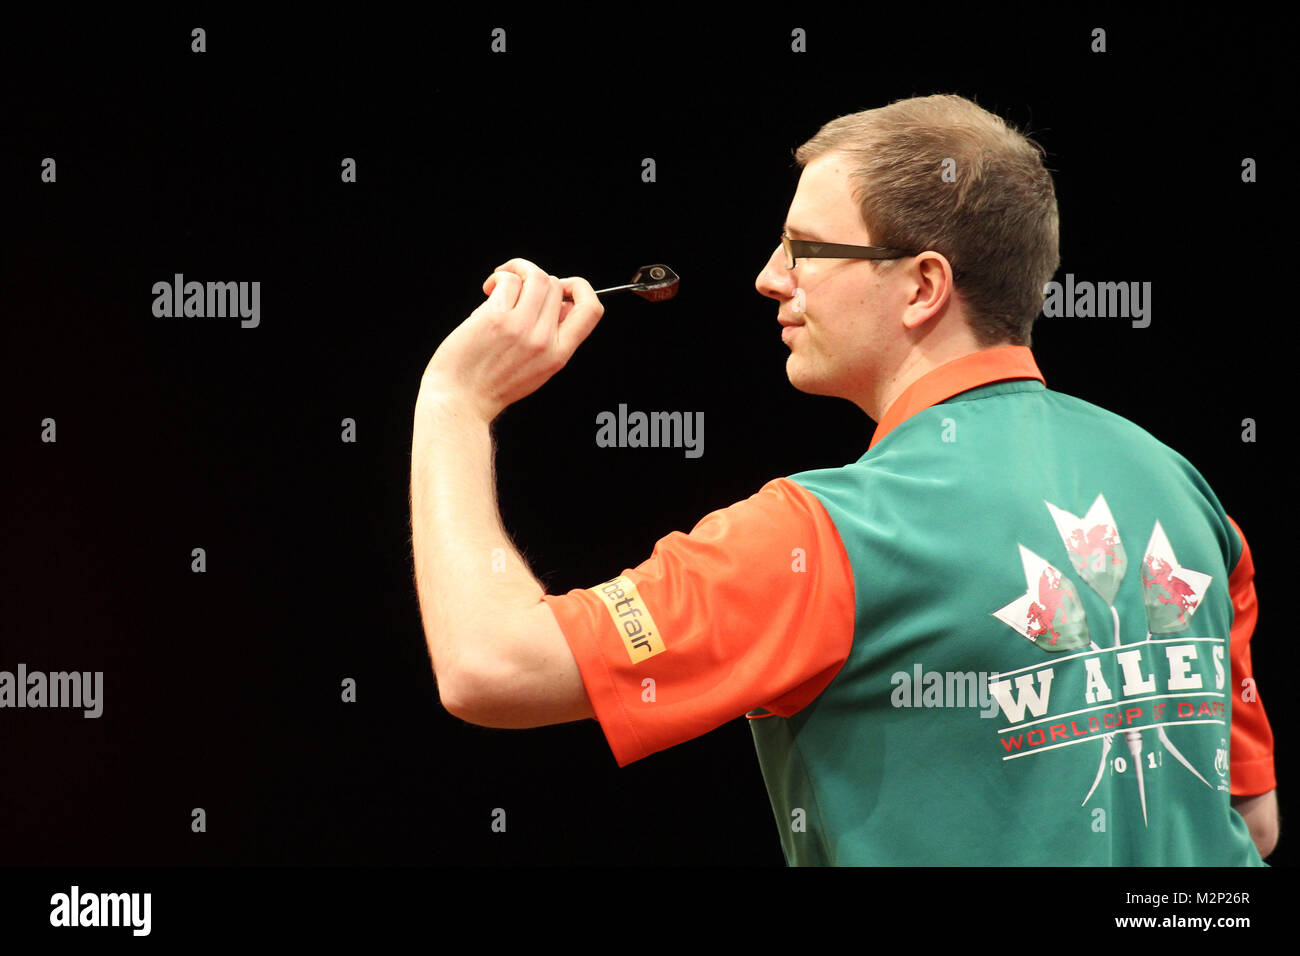 Mark webster darts stock and images -